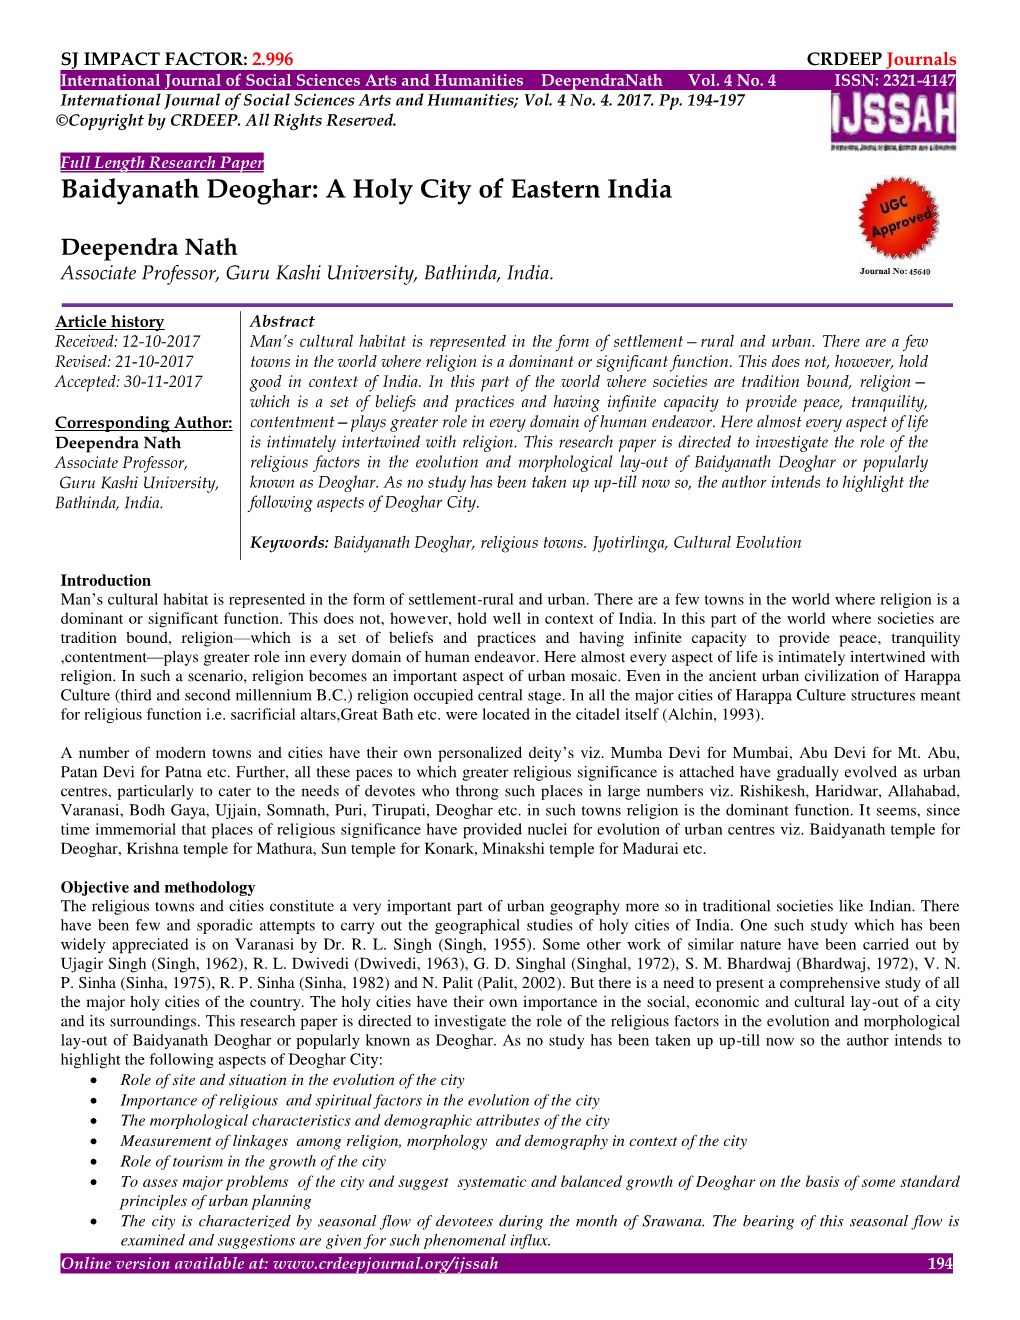 A Holy City of Eastern India